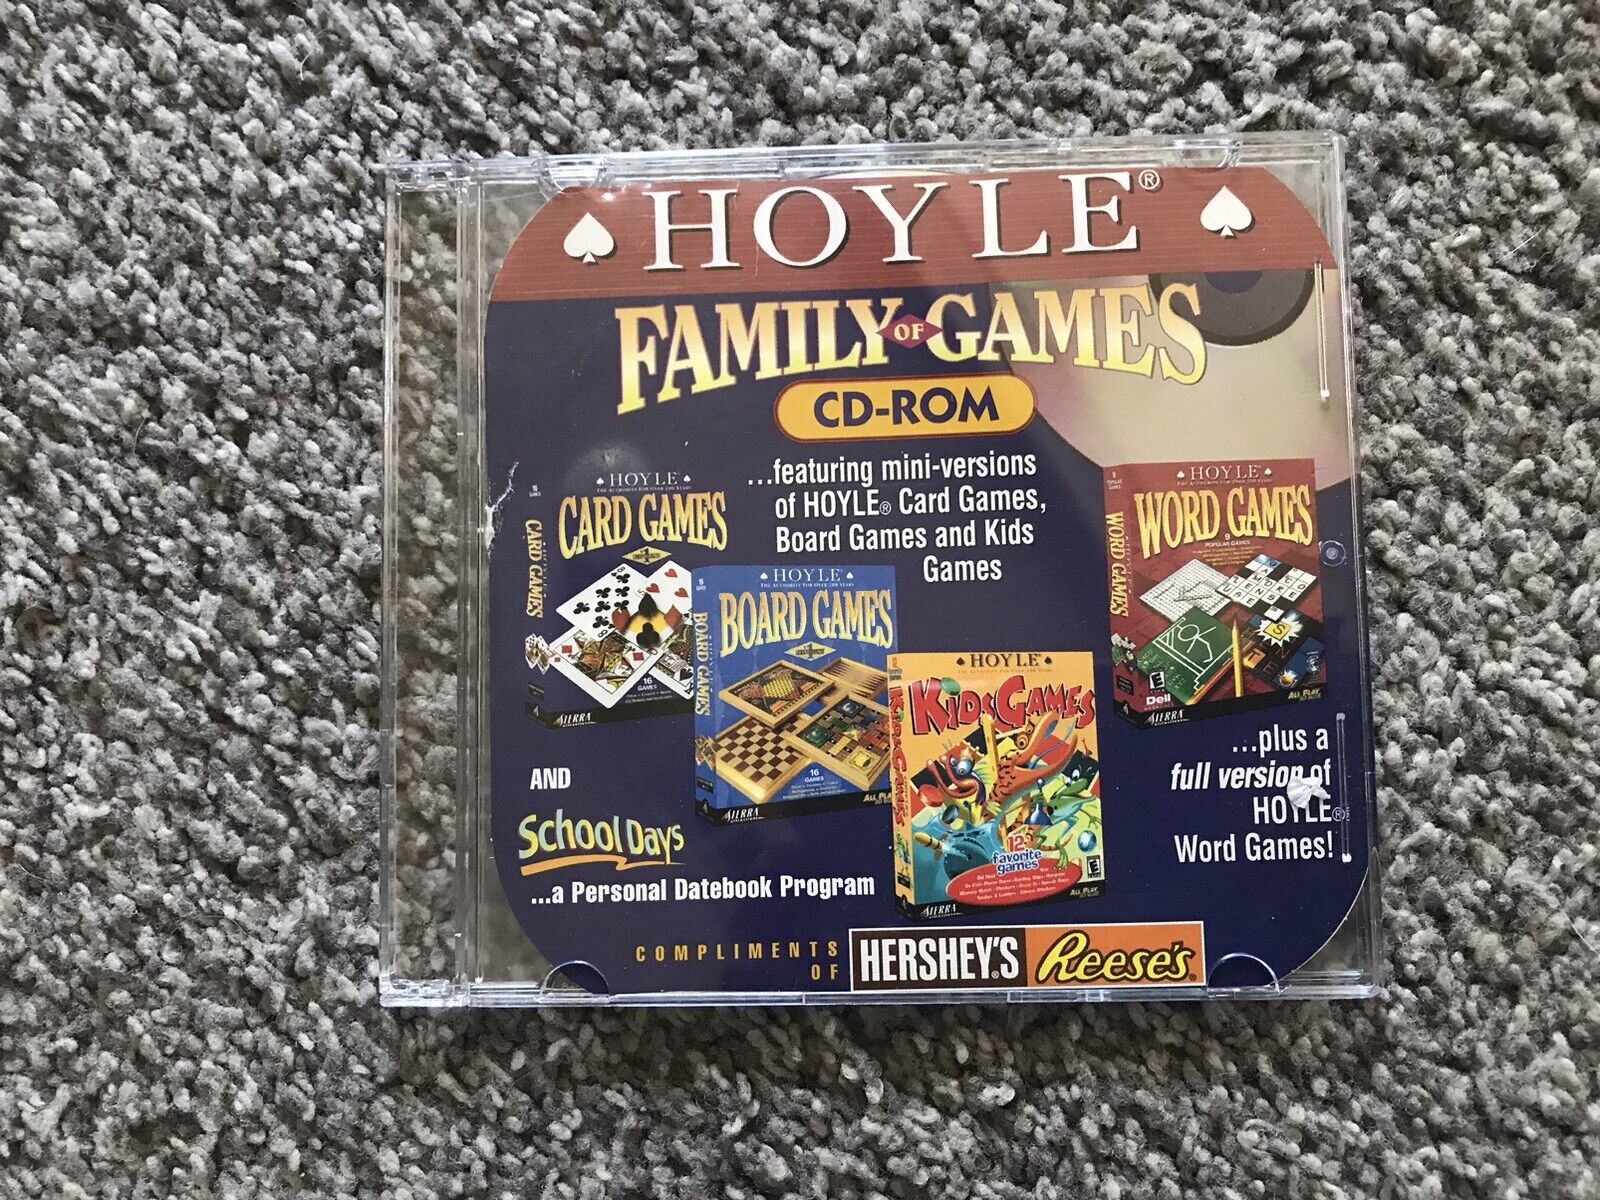 Hoyle Family of Games CD-ROM Compliments of Hershey\'s Reese\'s 2001 VG Condition